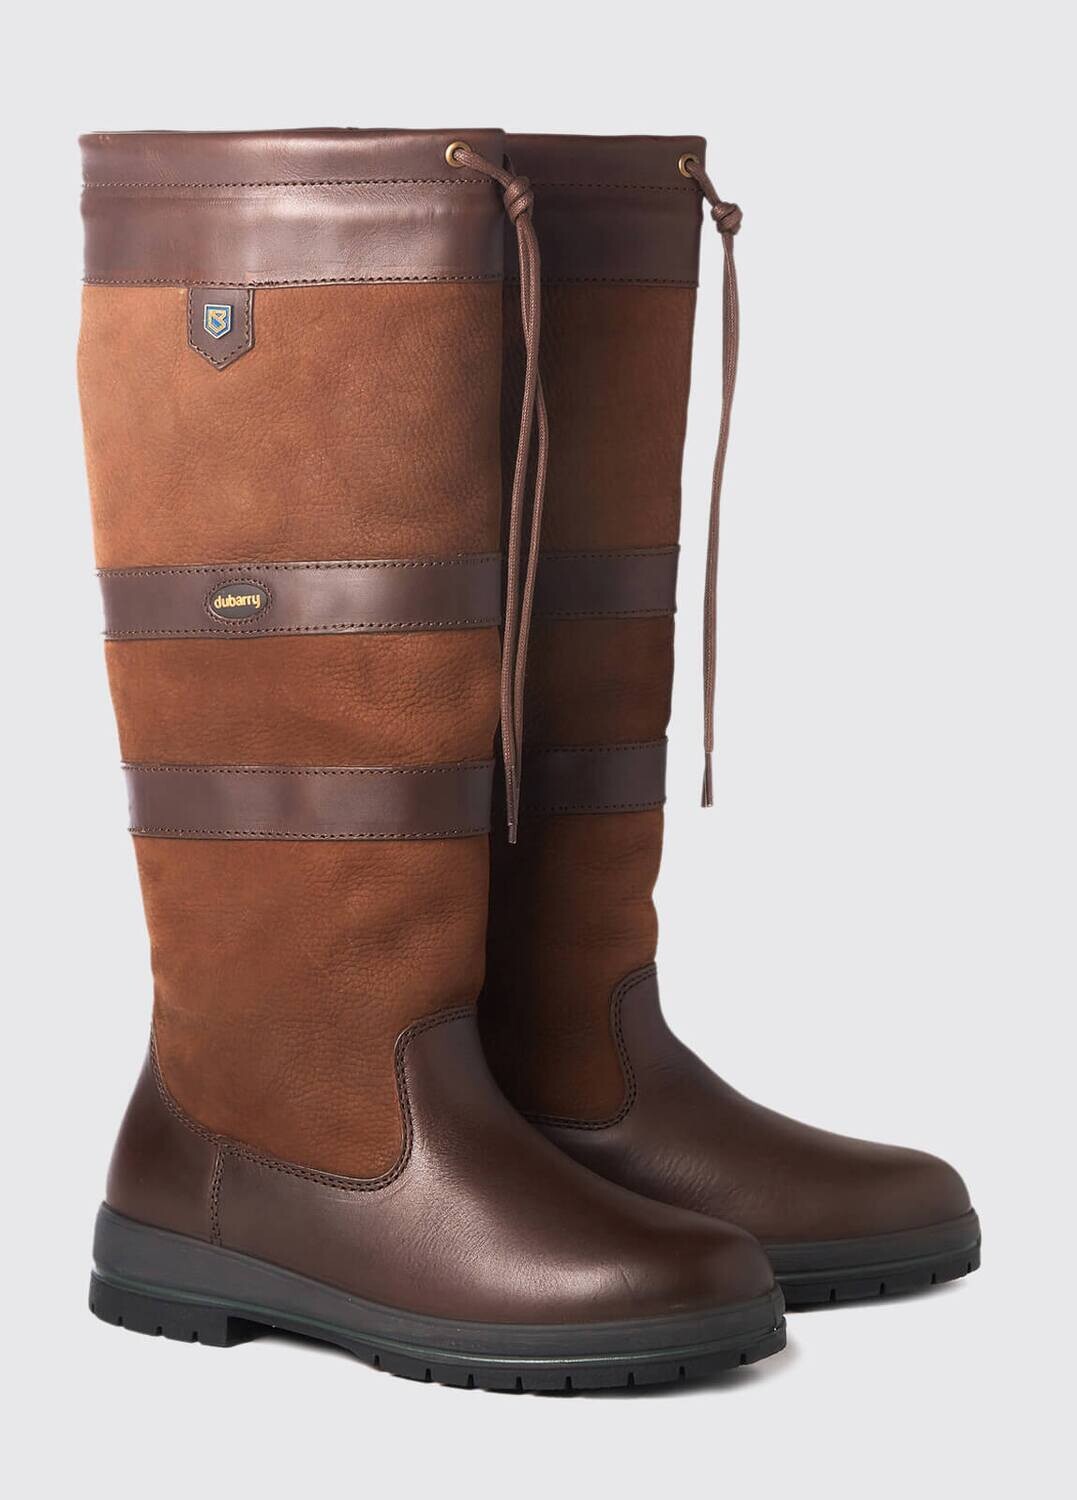 Dubarry - Galway (mollet large)